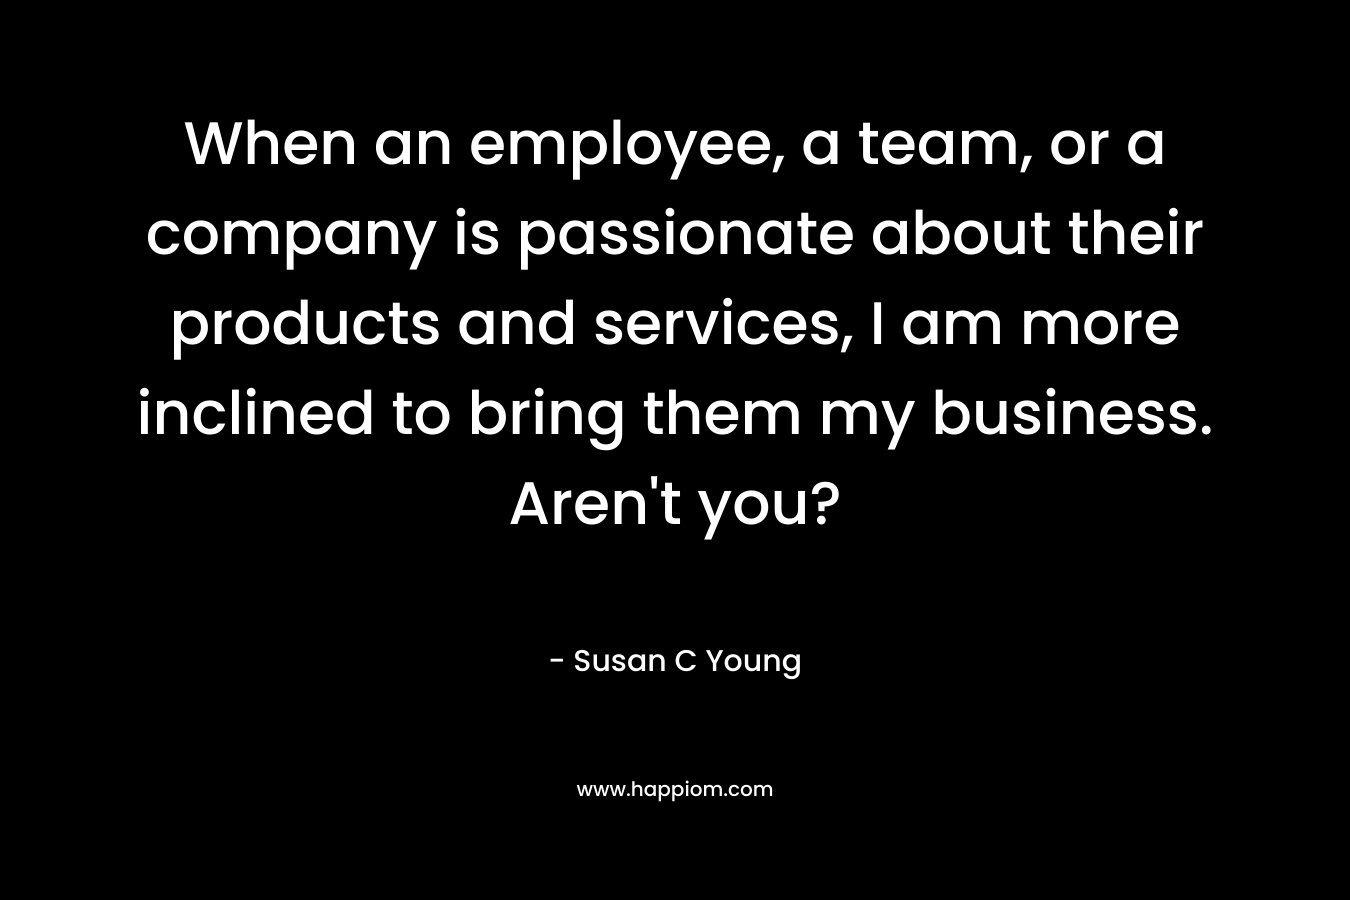 When an employee, a team, or a company is passionate about their products and services, I am more inclined to bring them my business. Aren’t you? – Susan C Young